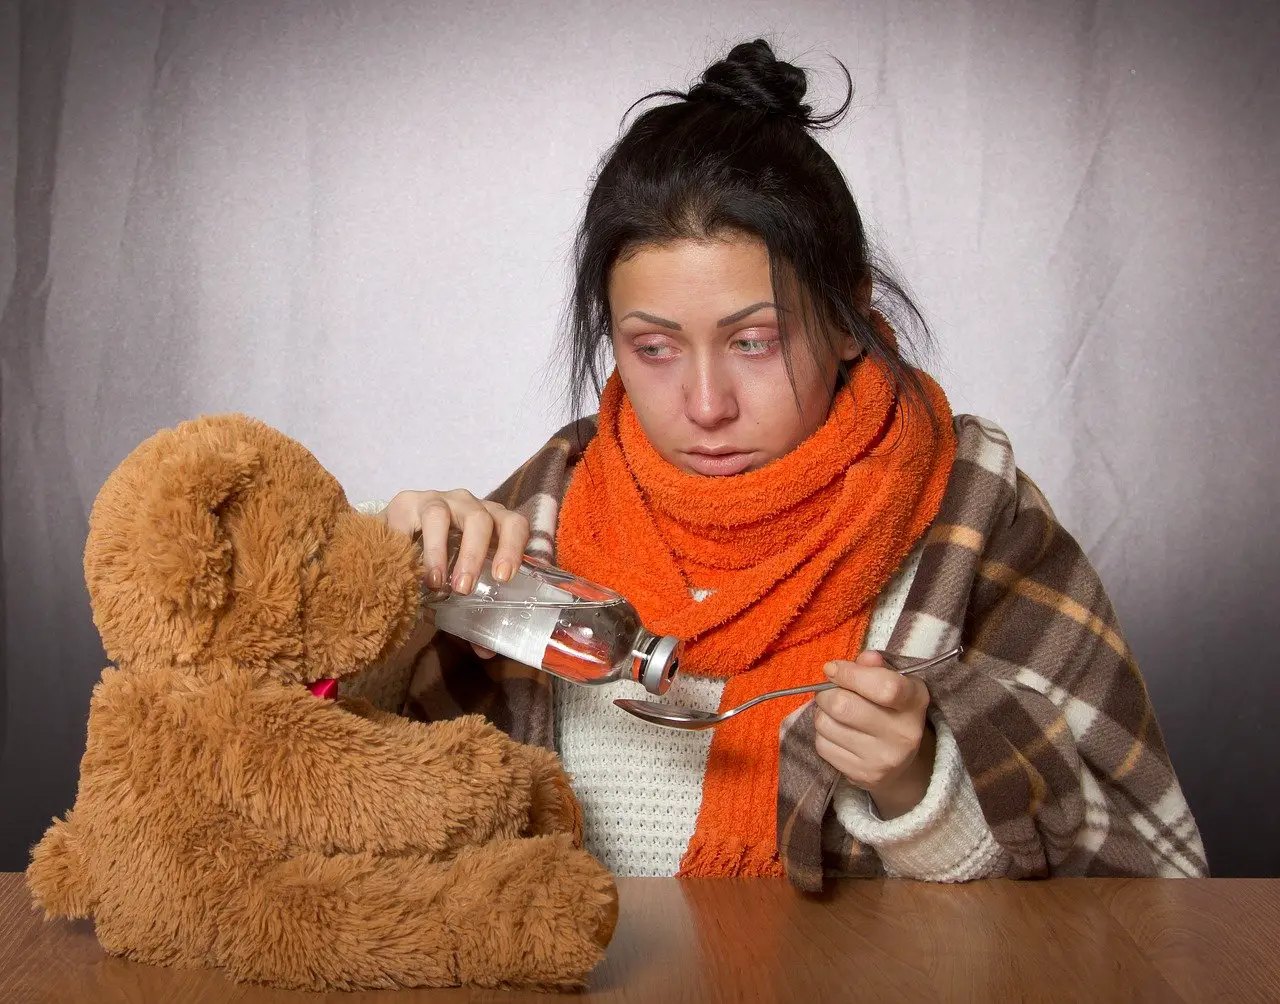 Sick woman with her Teddy Bear